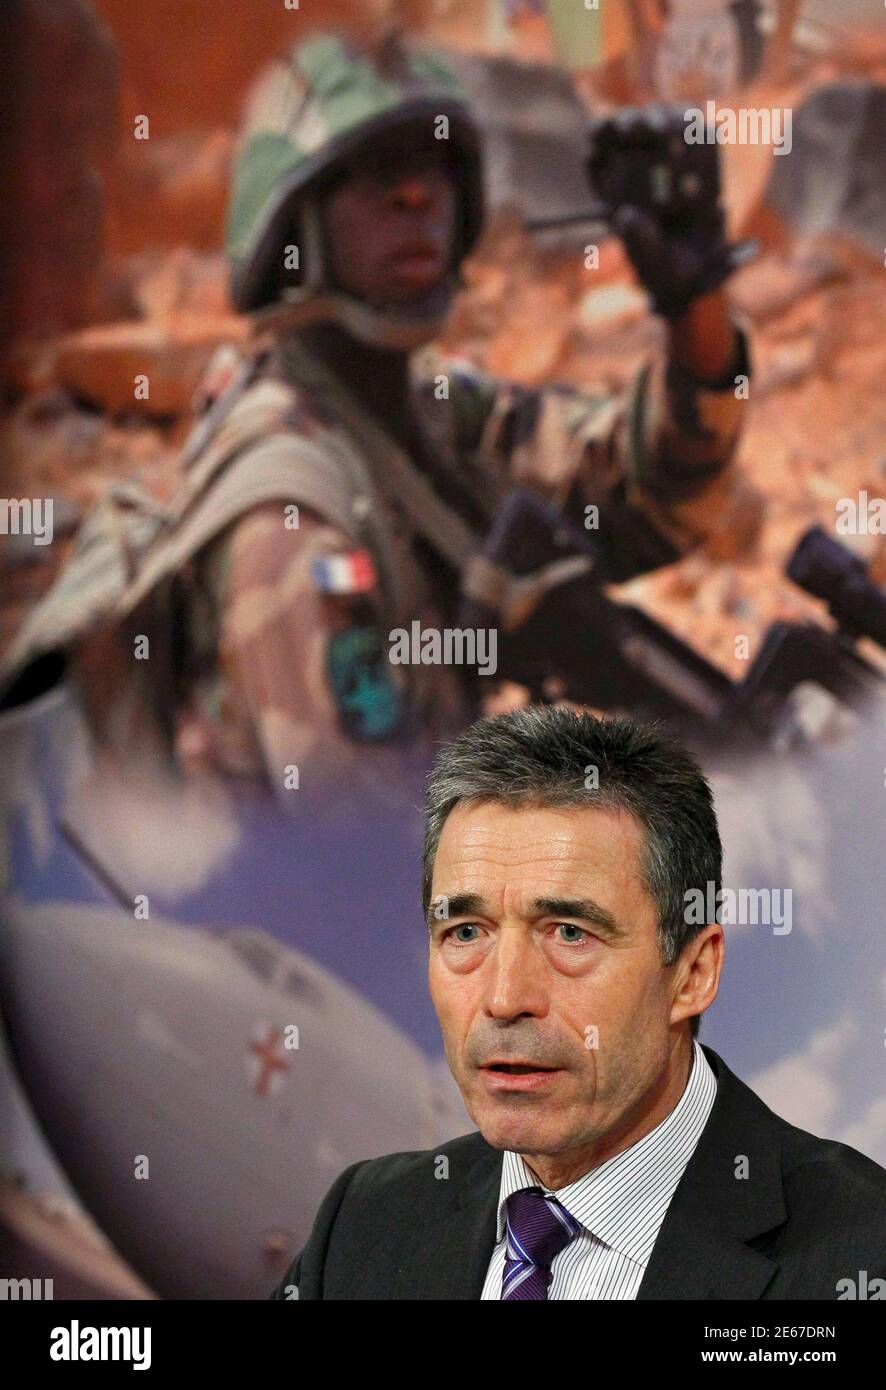 NATO Secretary General Anders Fogh Rasmussen holds a news conference during a NATO defence ministers meeting (NAC) at the Alliance headquarters in Brussels March 10, 2011. NATO defence ministers meeting in Brussels on Thursday and Friday will discuss options to respond to the turmoil in Libya, including a possible no-fly zone, officials said.      REUTERS/Yves Herman (BELGIUM  - Tags: POLITICS CONFLICT MILITARY) Stock Photo